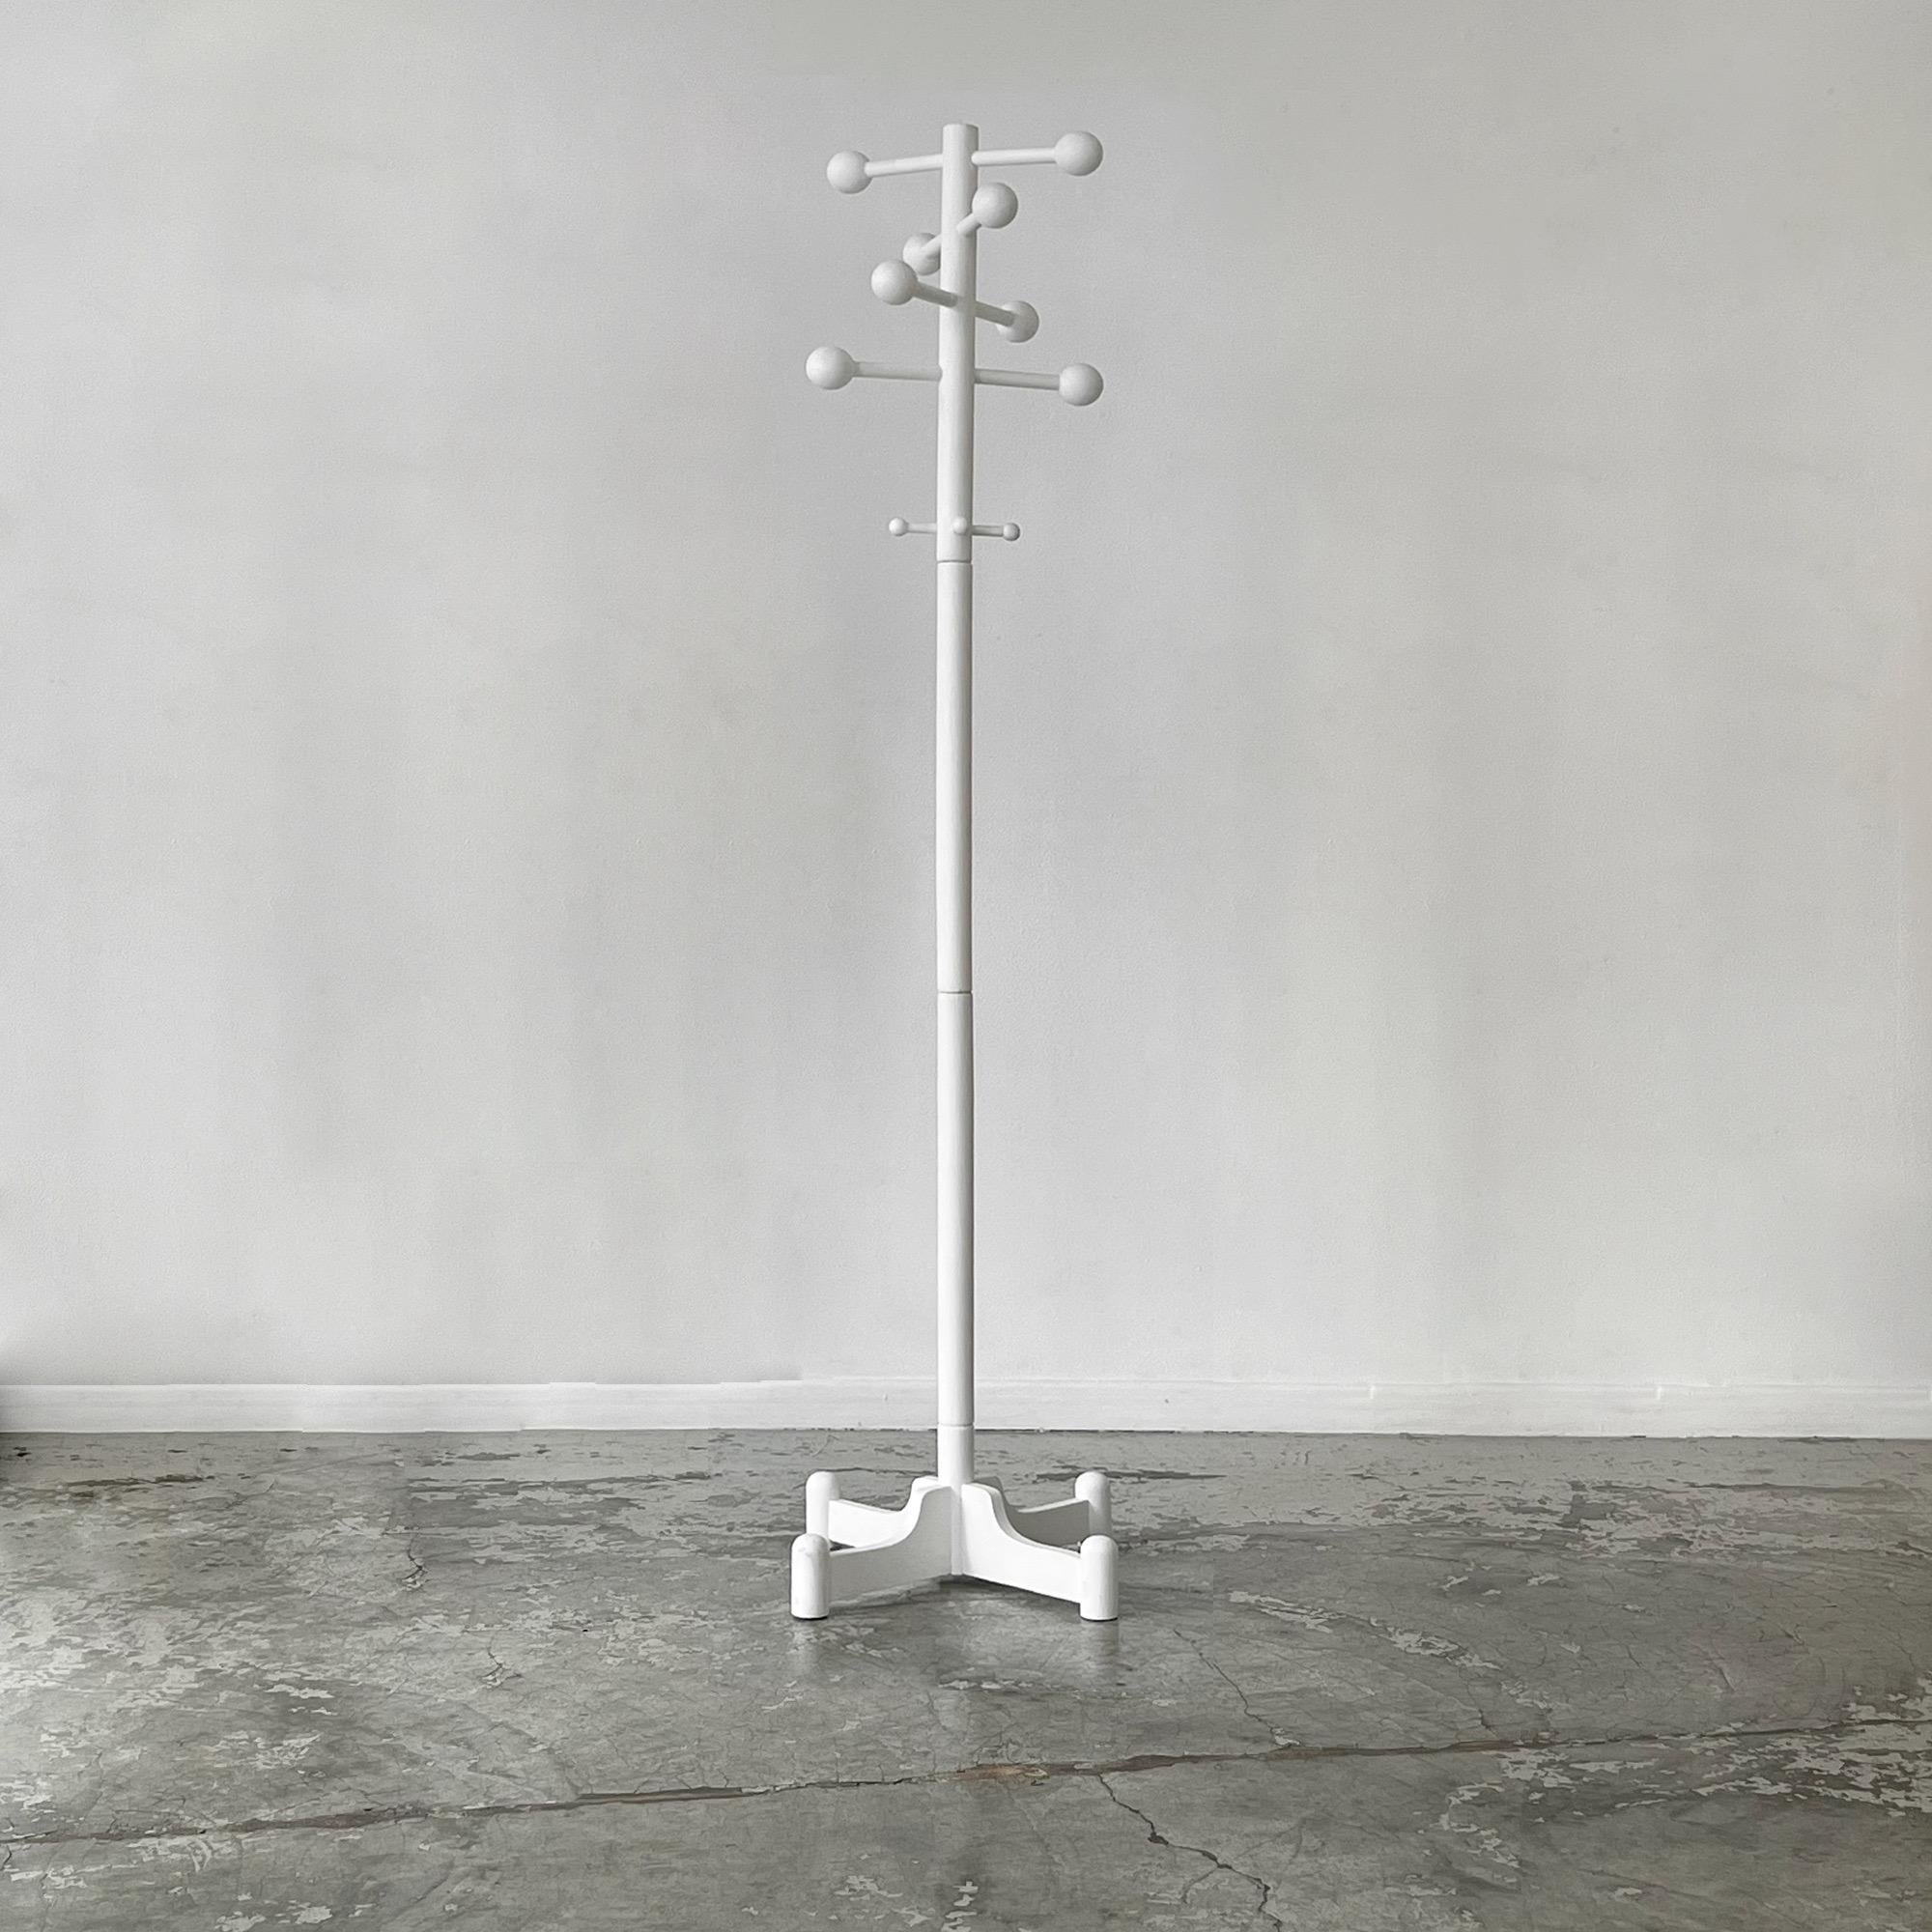 This coat rack was designed in the 1980s. Its designer is unknown. It takes its inspiration from the Atomic Age of the '50s, when the atomic weapon was created. During this period, mankind was fascinated by nuclear power. Architecture, design,